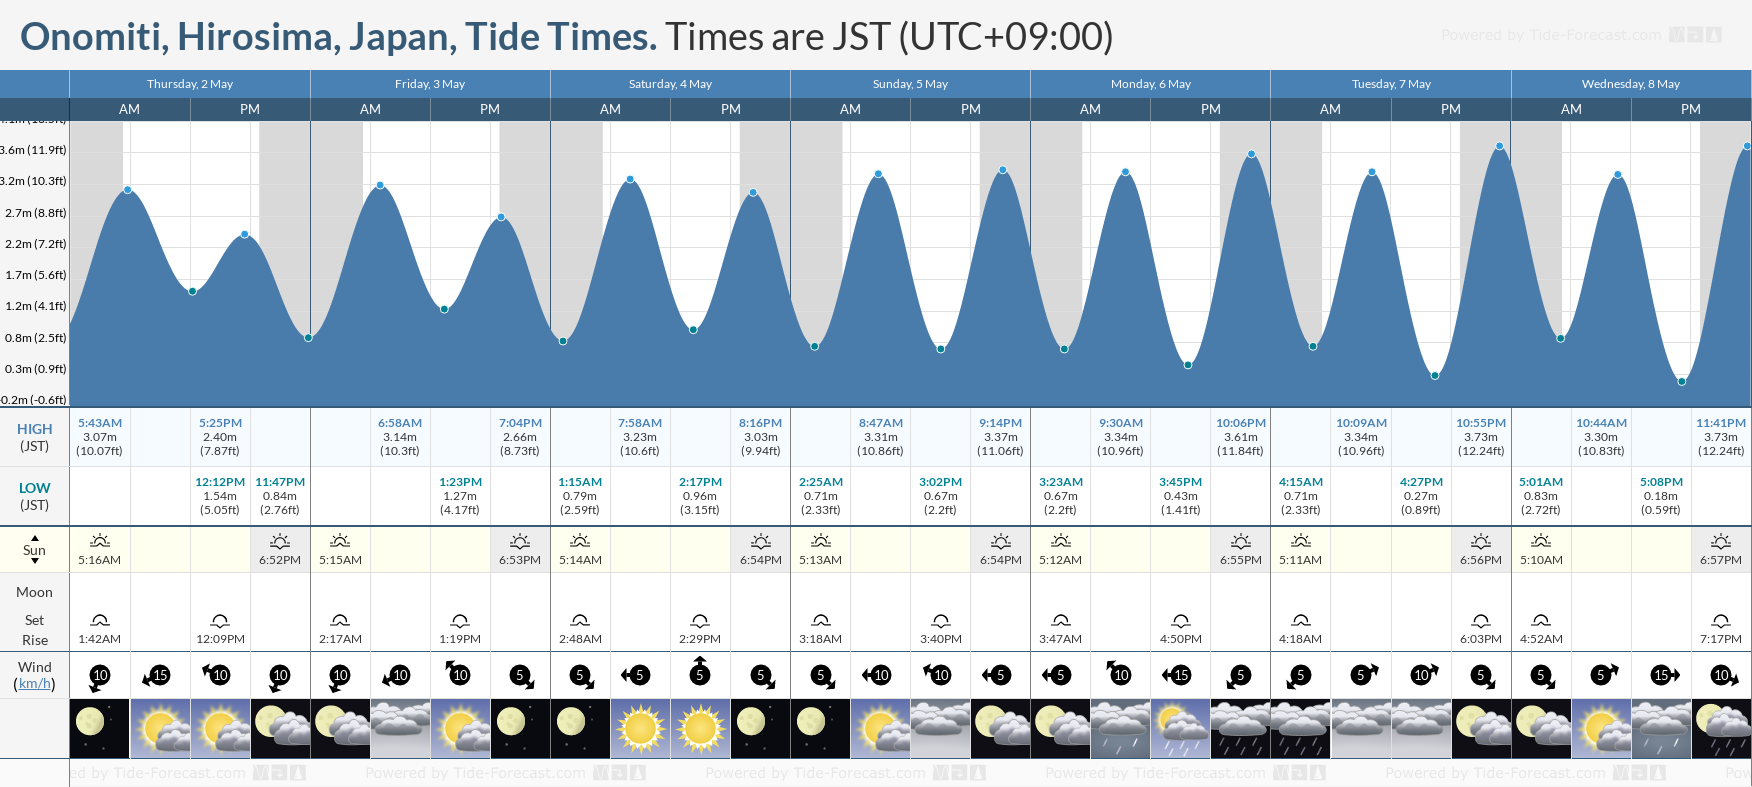 Onomiti, Hirosima, Japan Tide Chart including high and low tide tide times for the next 7 days